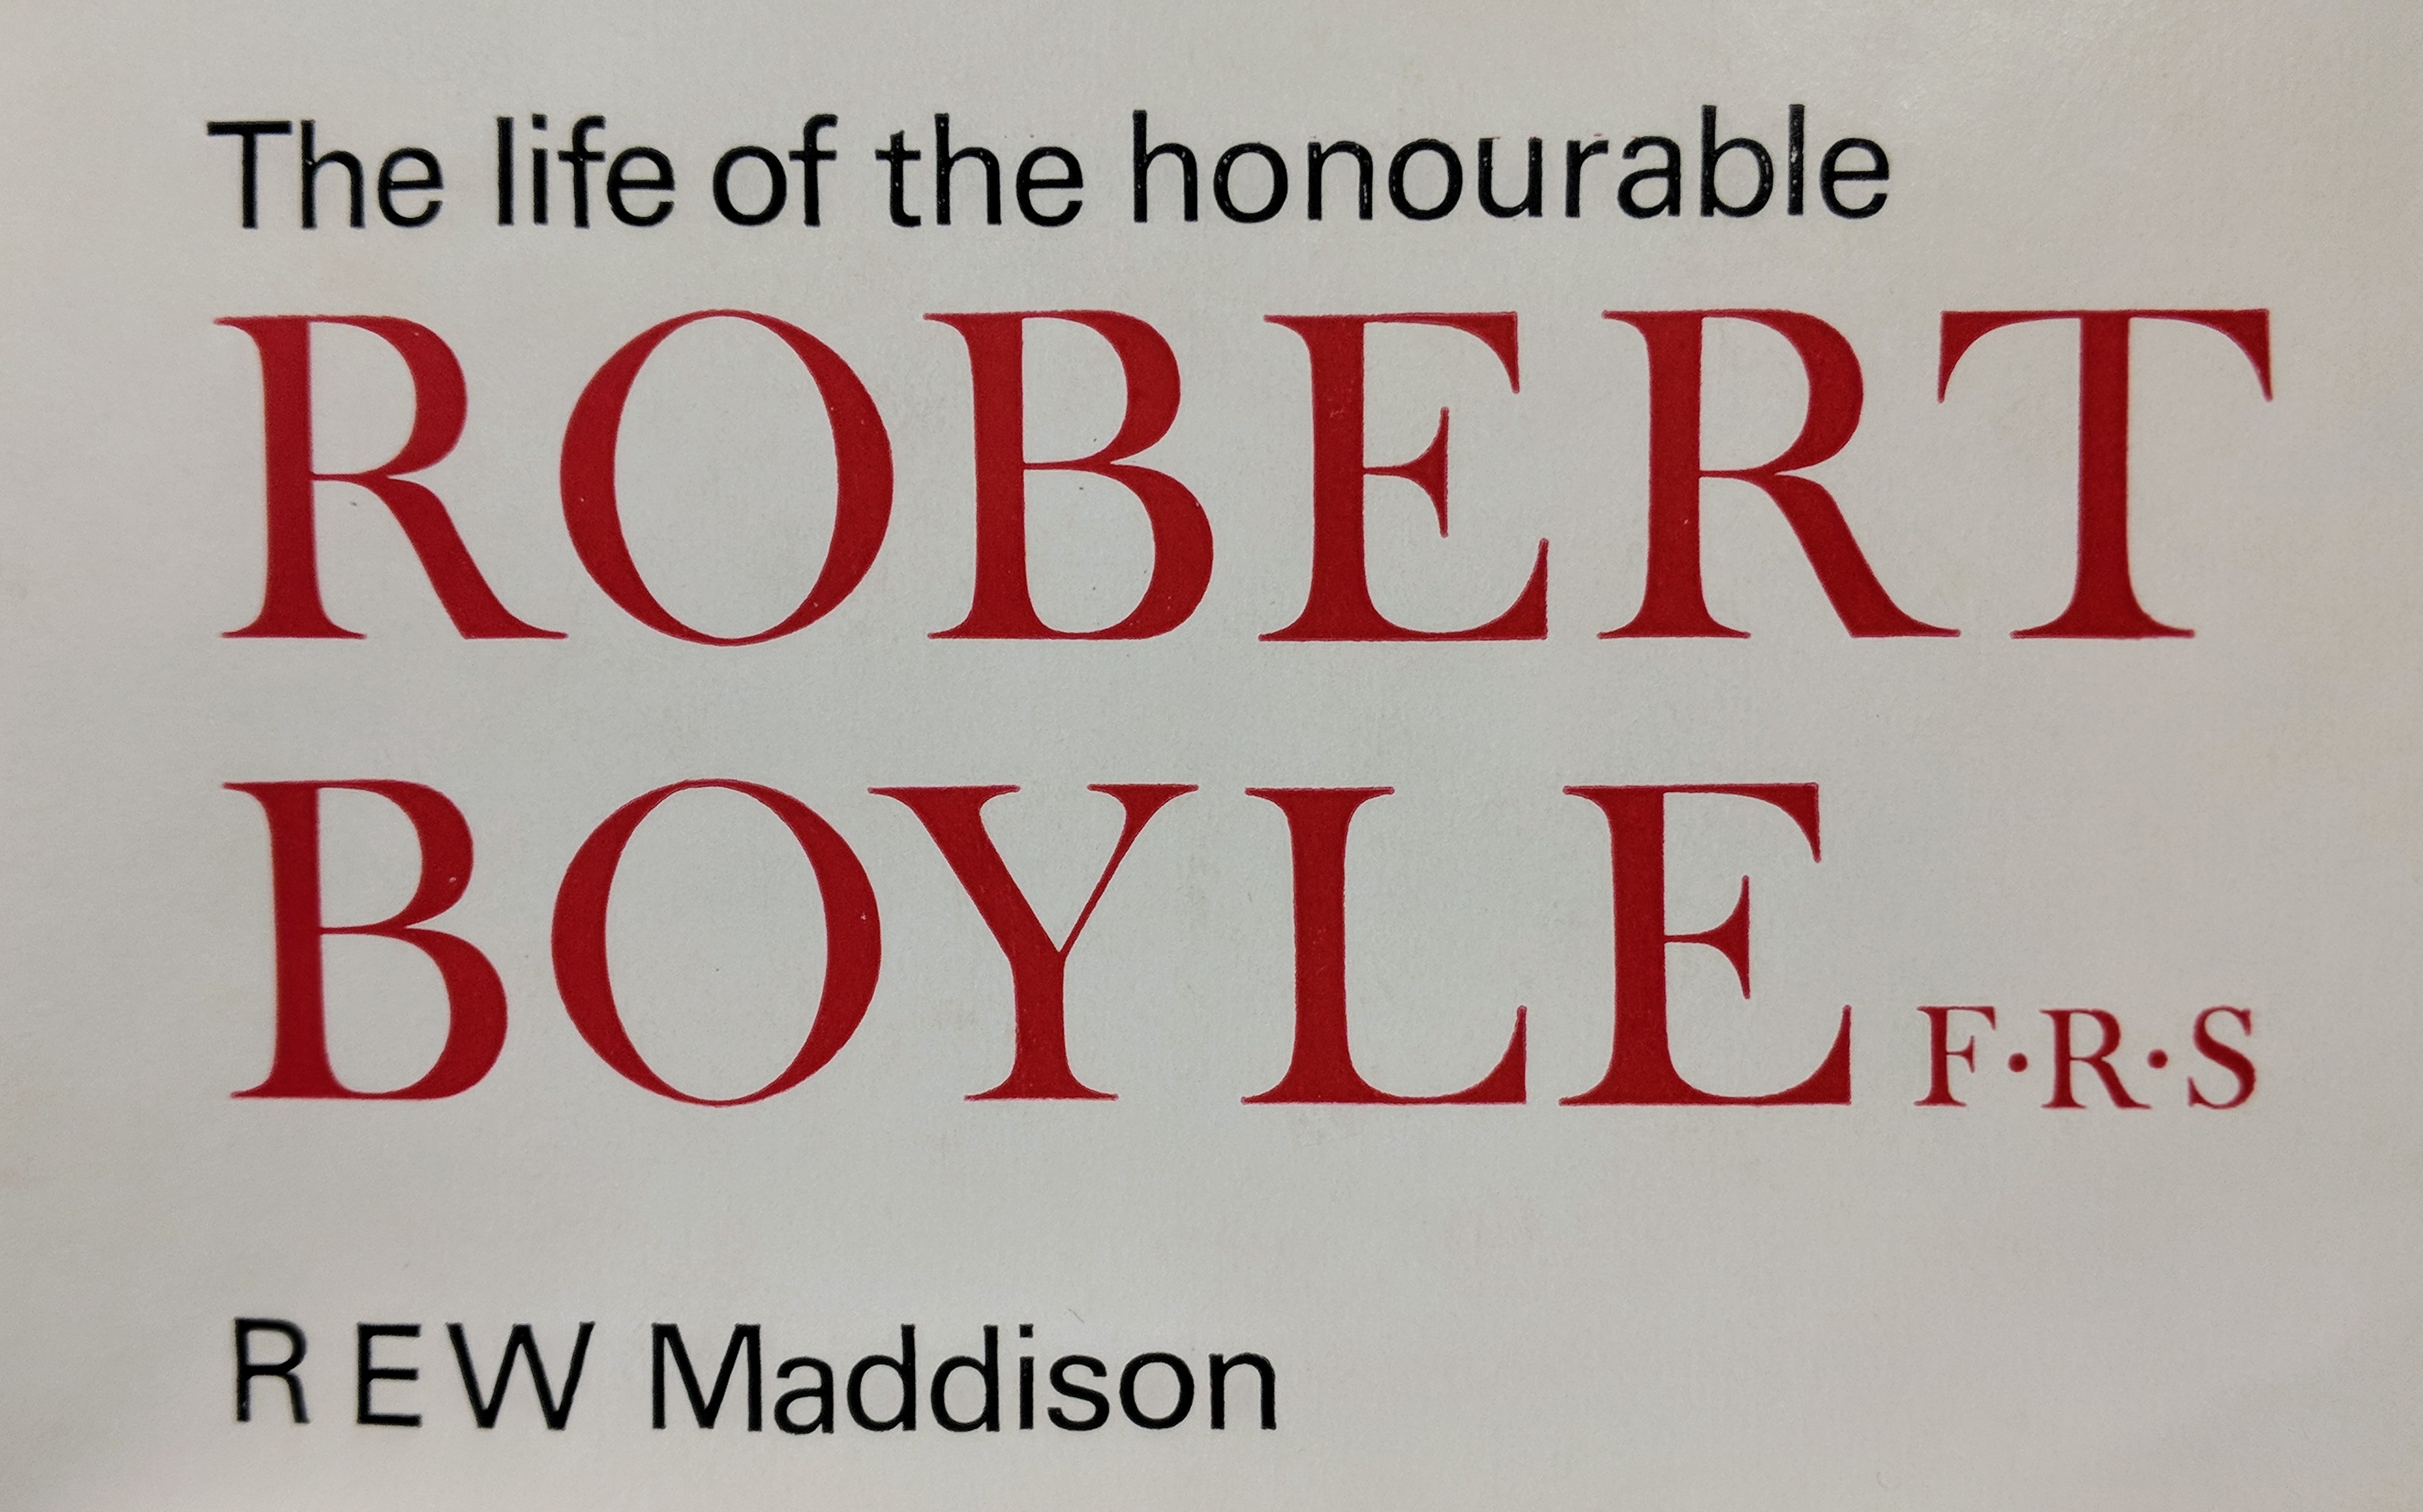 Title page of Maddison's biography of Robert Boyle